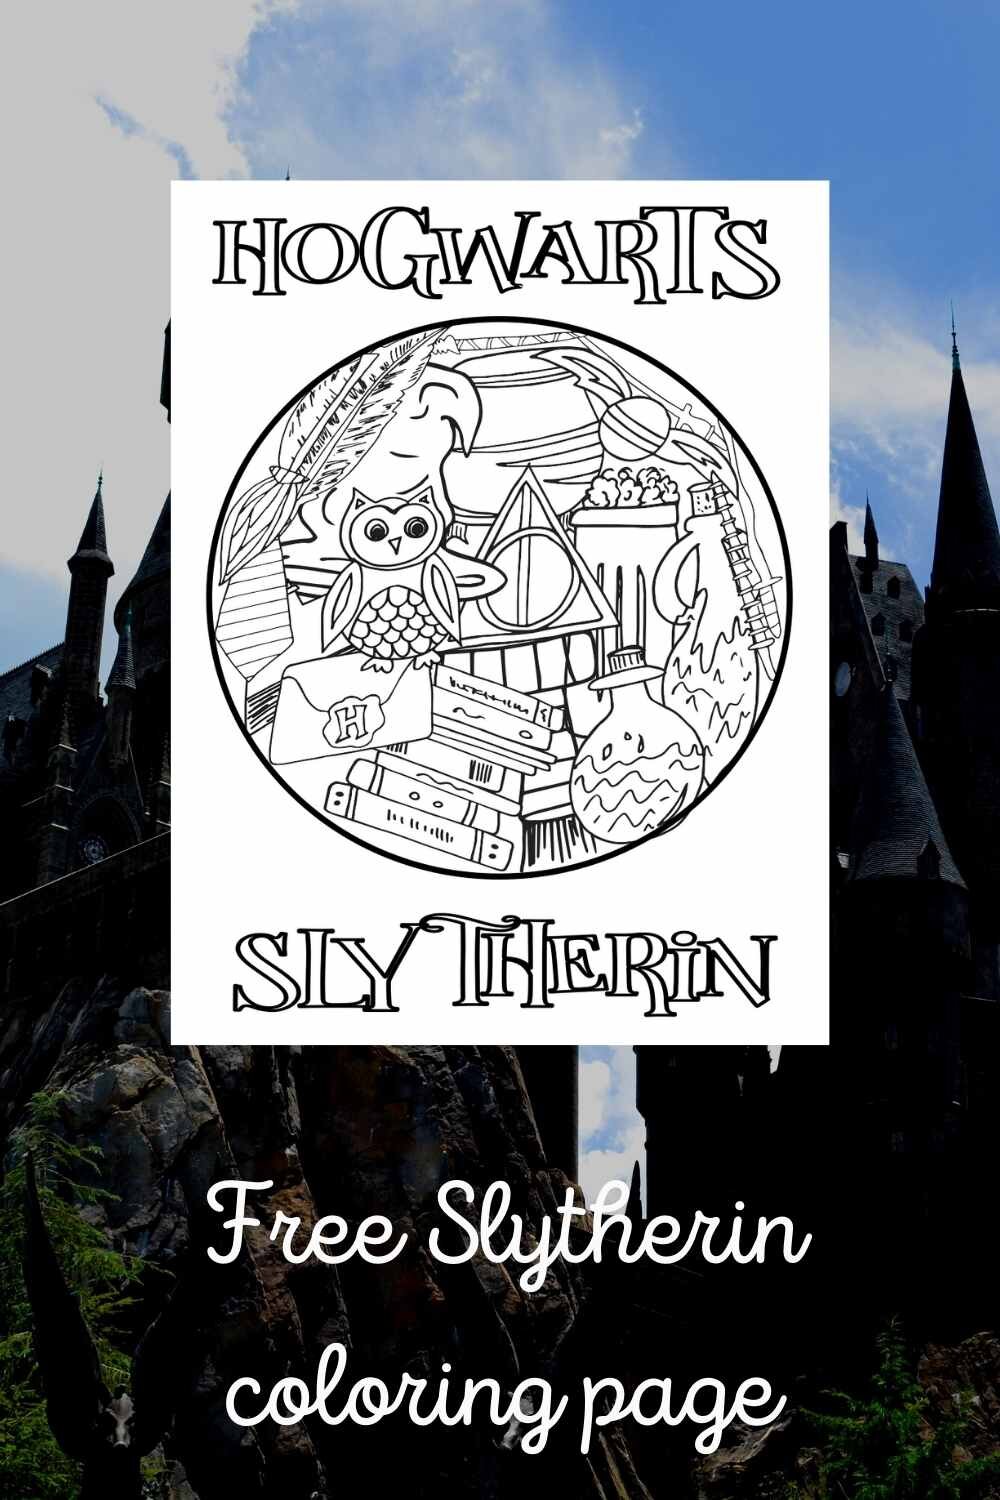 Free Slytherin coloring page - harry potter inspired pages from Stevie Doodles